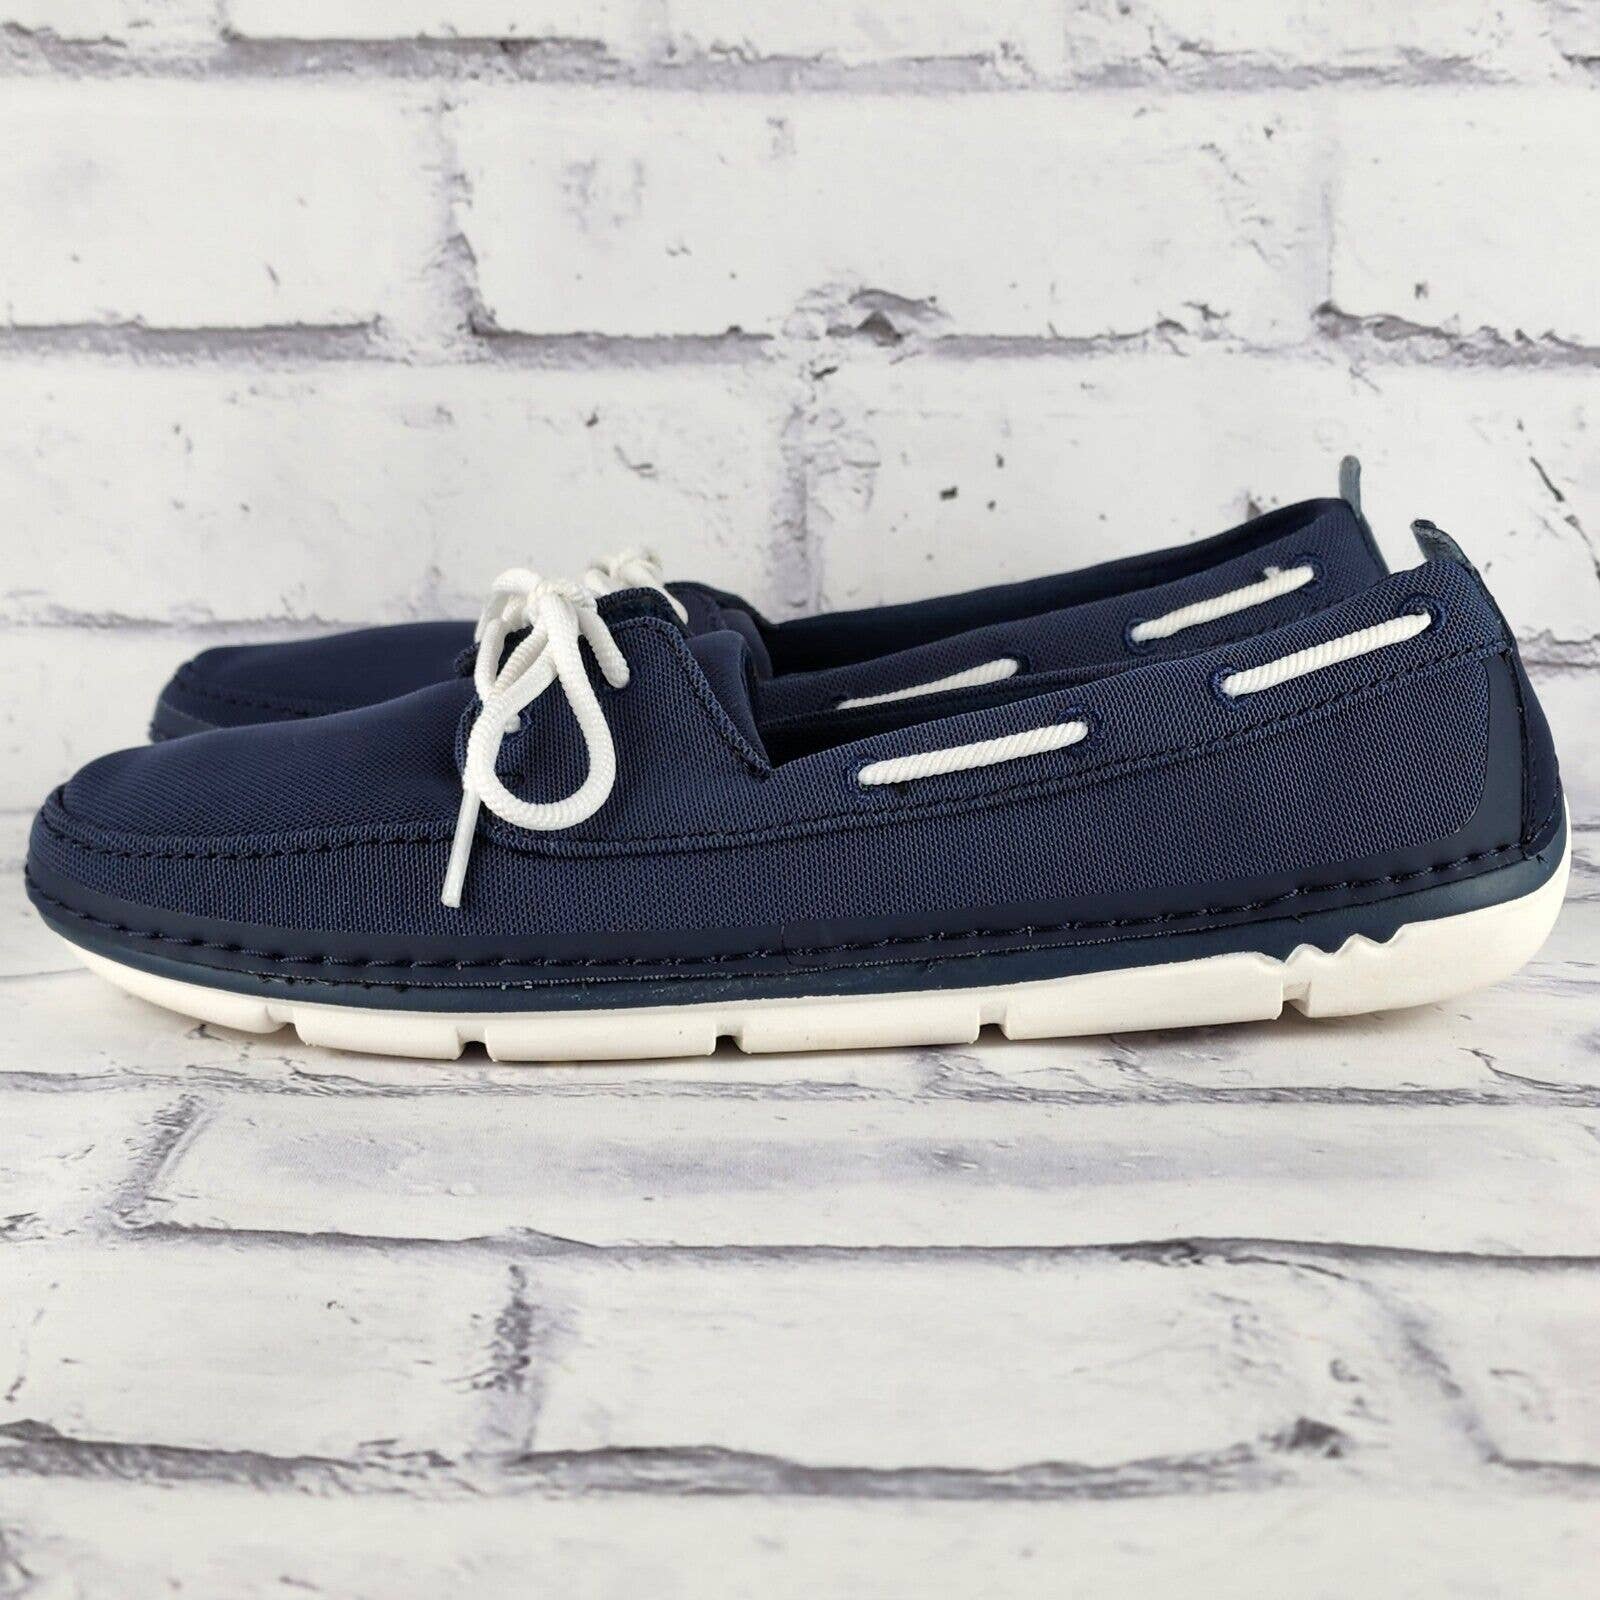 Clarks Cloudsteppers Step Maro Boat Shoes Women's Sz 7 W Navy Lightweight Shoes